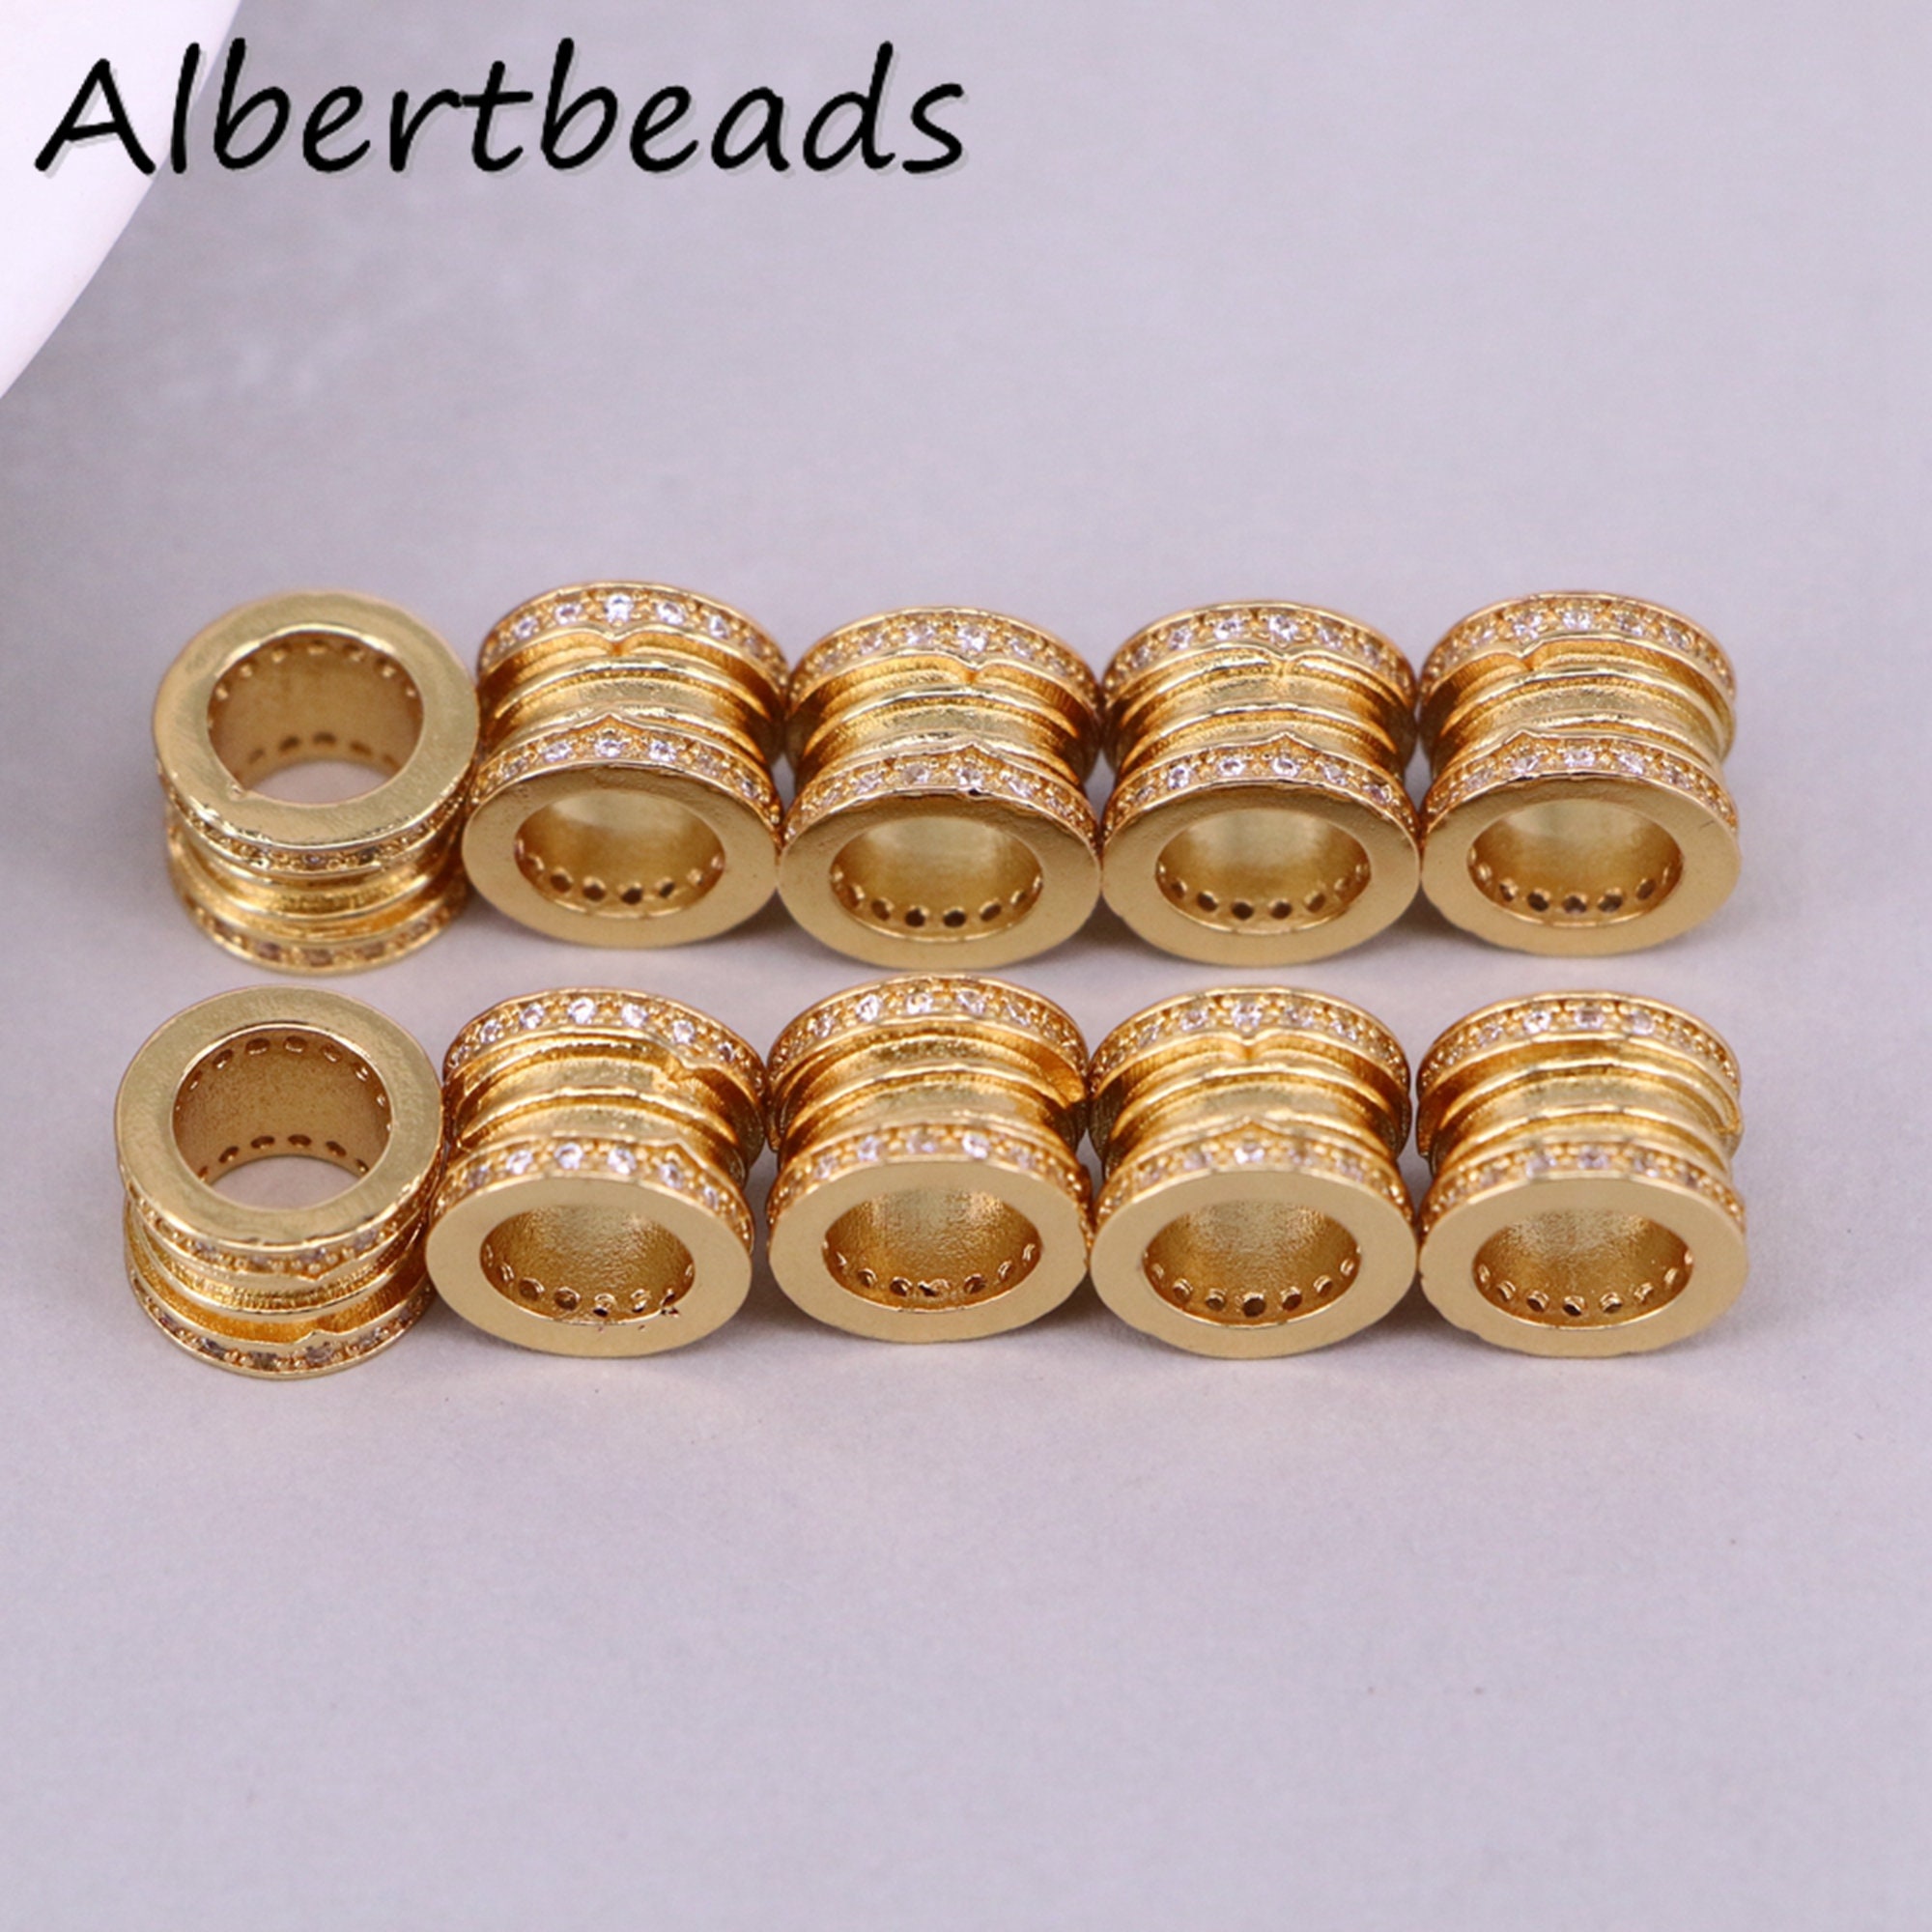 6x4mm 20pc Gold Barrel Beads, Gold Cylinder Beads, Gold Spacer Beads,  Brushed Gold Beads, Gold Drum Beads for Jewelry Making 6x4mm Beads 